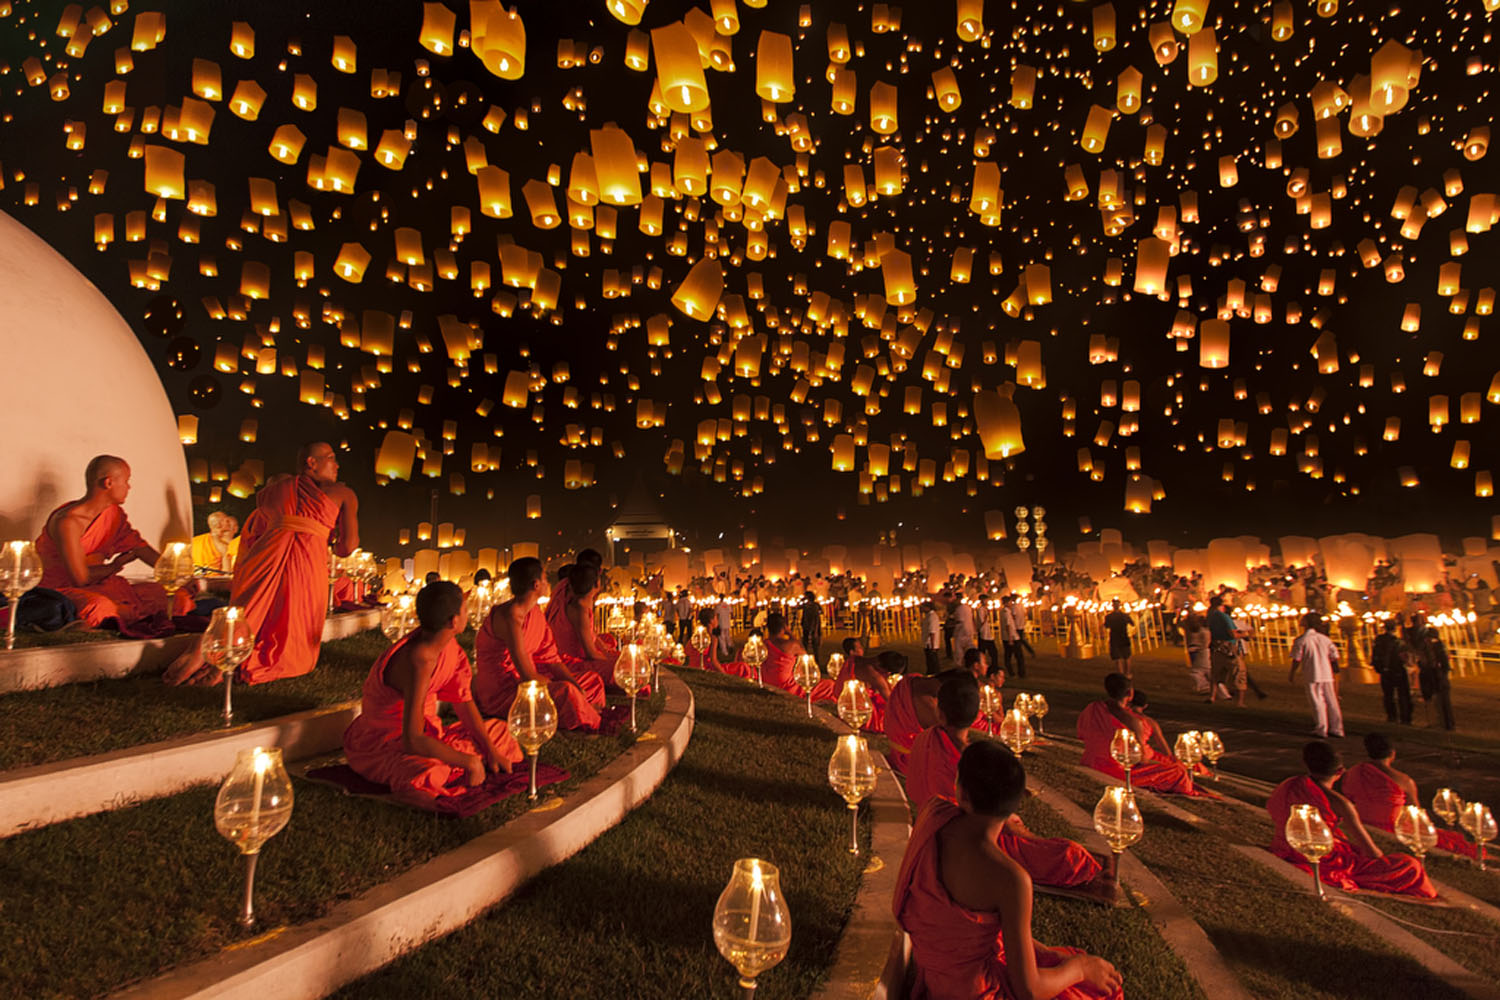 Ng Chai Hock: "Monks look up at a magnificent night sky filled with thousands of lanterns during the Yi Peng lantern festival. This was the moment I'd been waiting for and it passed very quickly due to strong wind. A very heavy downpour occurred right after we left."